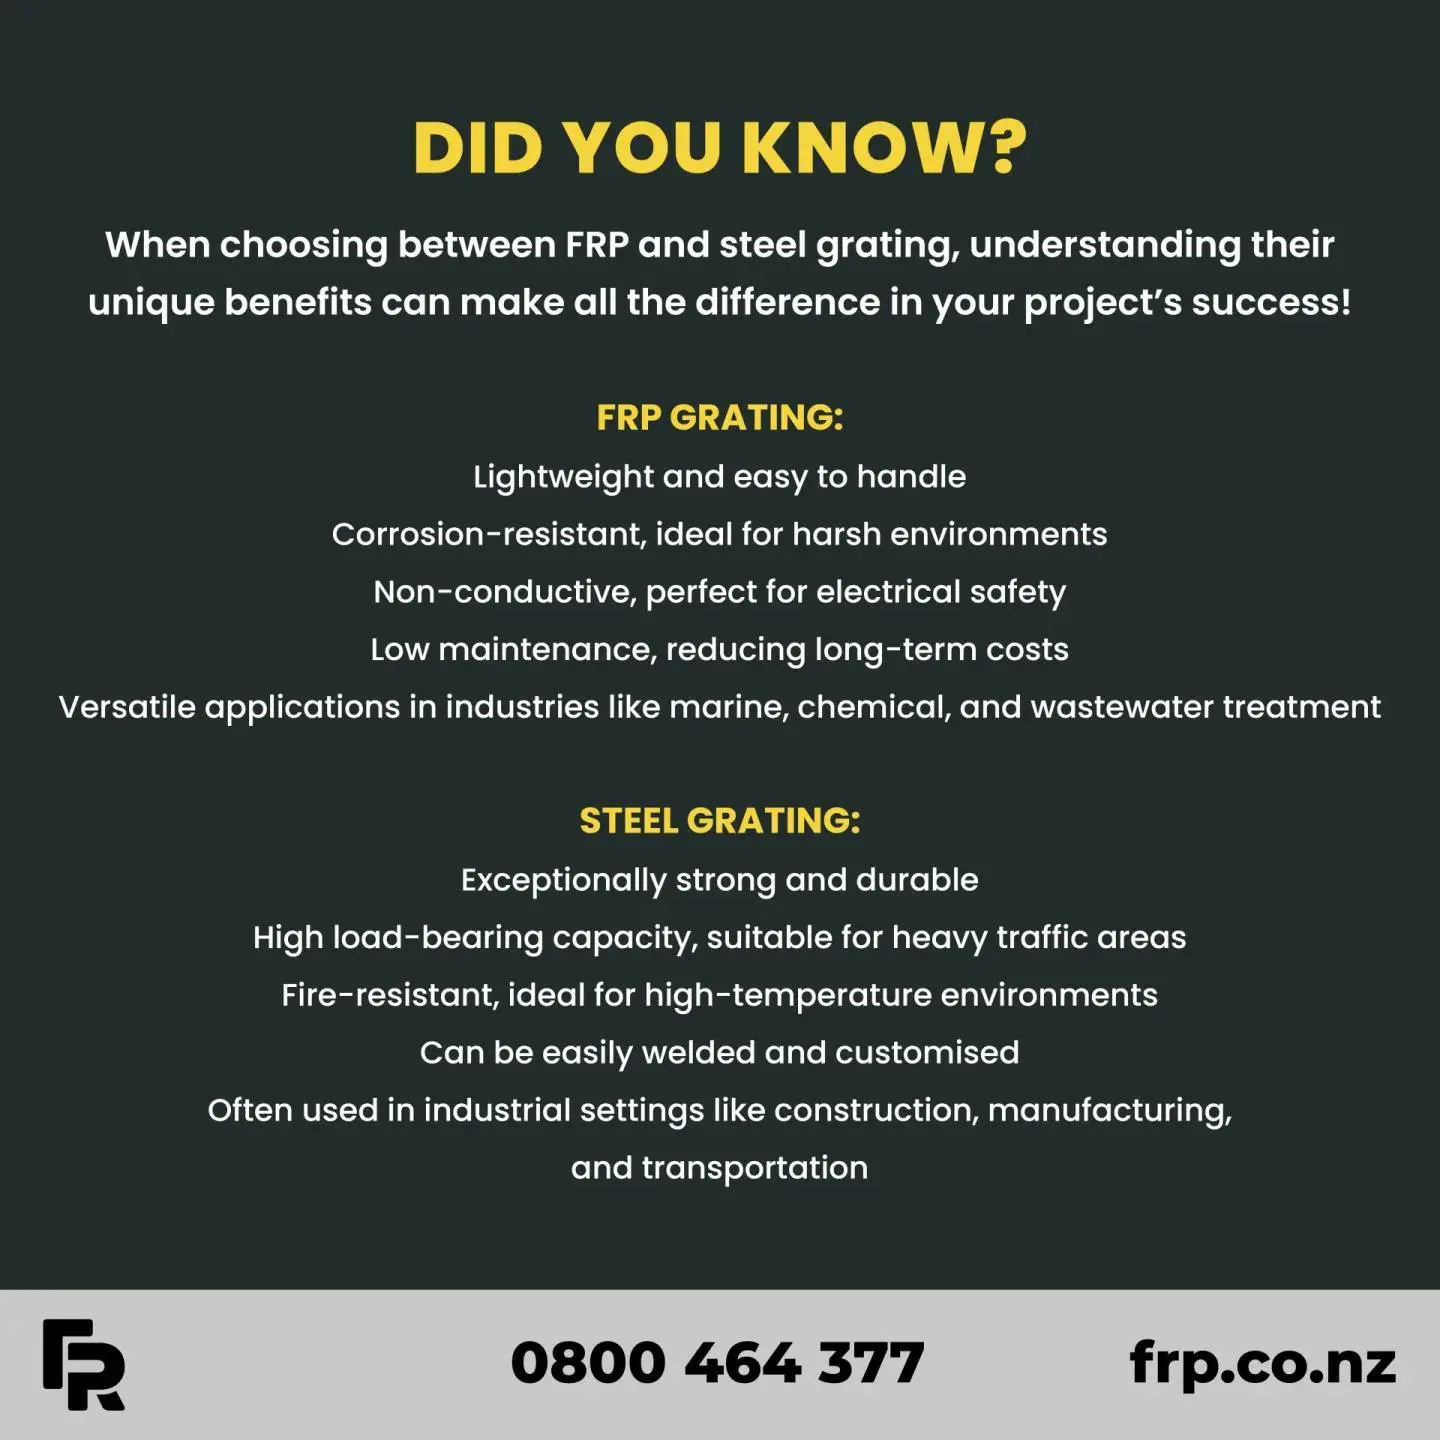 At FRP Ltd, we offer a wide range of FRP and steel products to meet the diverse needs of industries nationwide. Whether you're looking for lightweight durability or heavy-duty strength, we've got you covered!

#frp #frpproducts #industrial #engineering #construction #maintenance #engineers #commercial #marine #civil #grating #steel #factories #transportation #manufacturing #wastewater